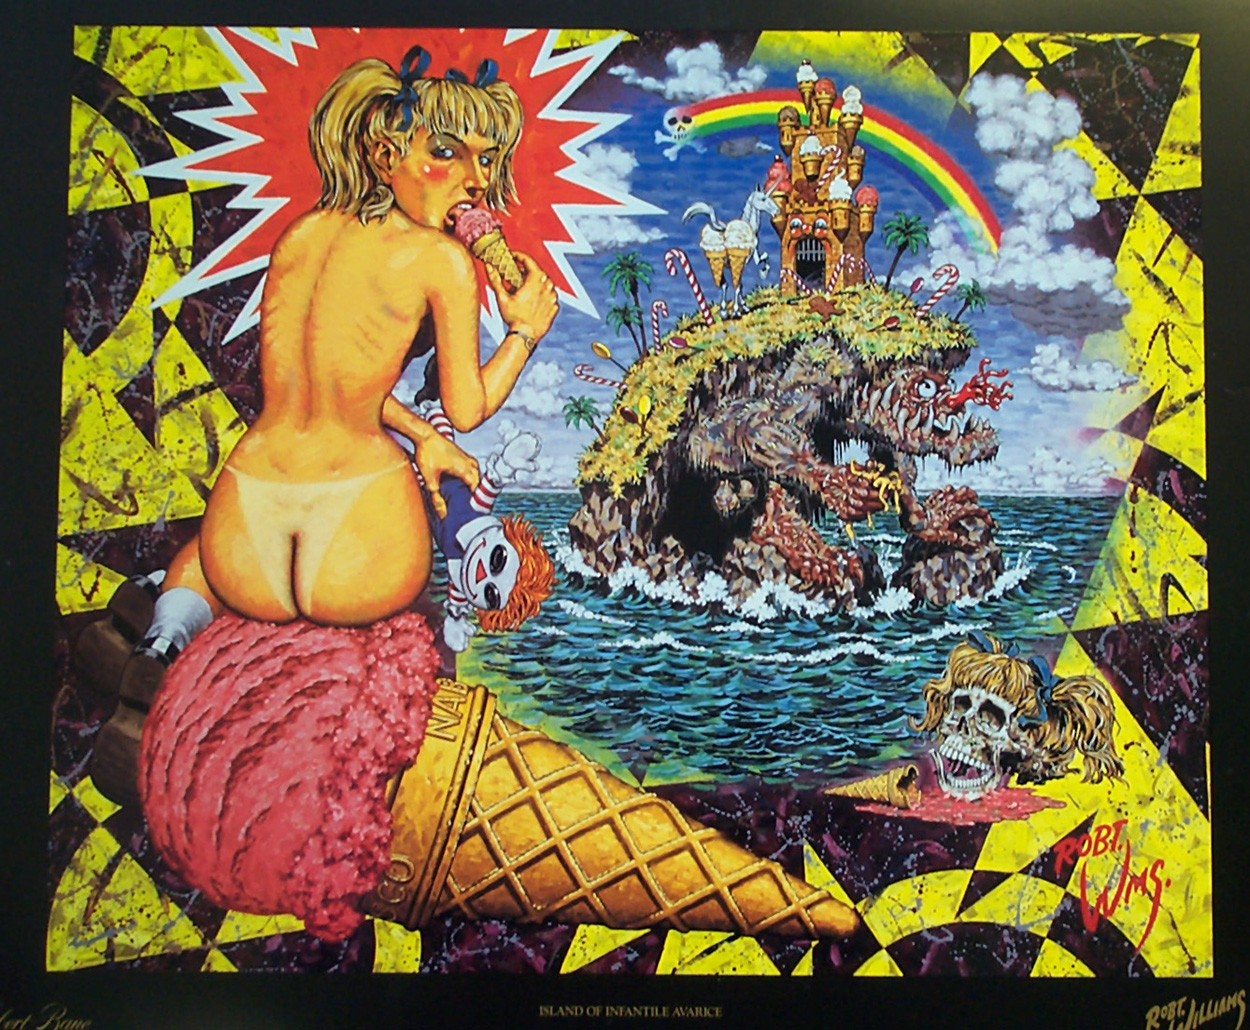 Island of Infantile Avarice (Limited Edition Print) art by Robert Williams Art at The Illustration Art Gallery